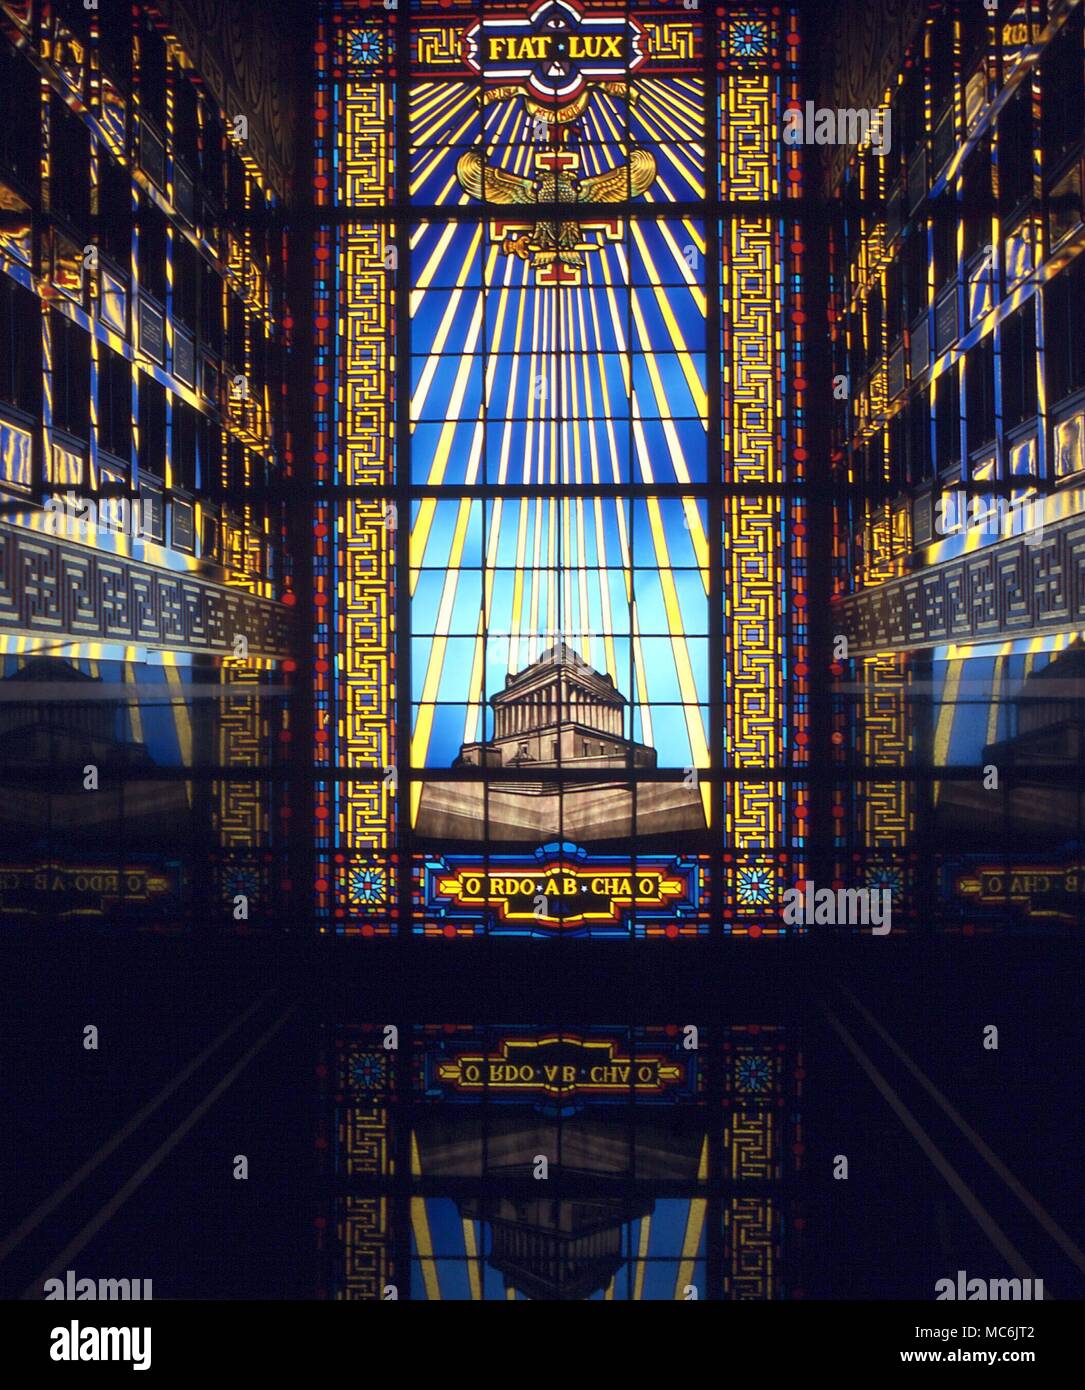 MASONIC - SYMBOLS. The light of the Fiat Lux descending upon the Temple of the Supreme Council, Southern Jurisdiction, Washington DC, Stained glass in the temple Stock Photo